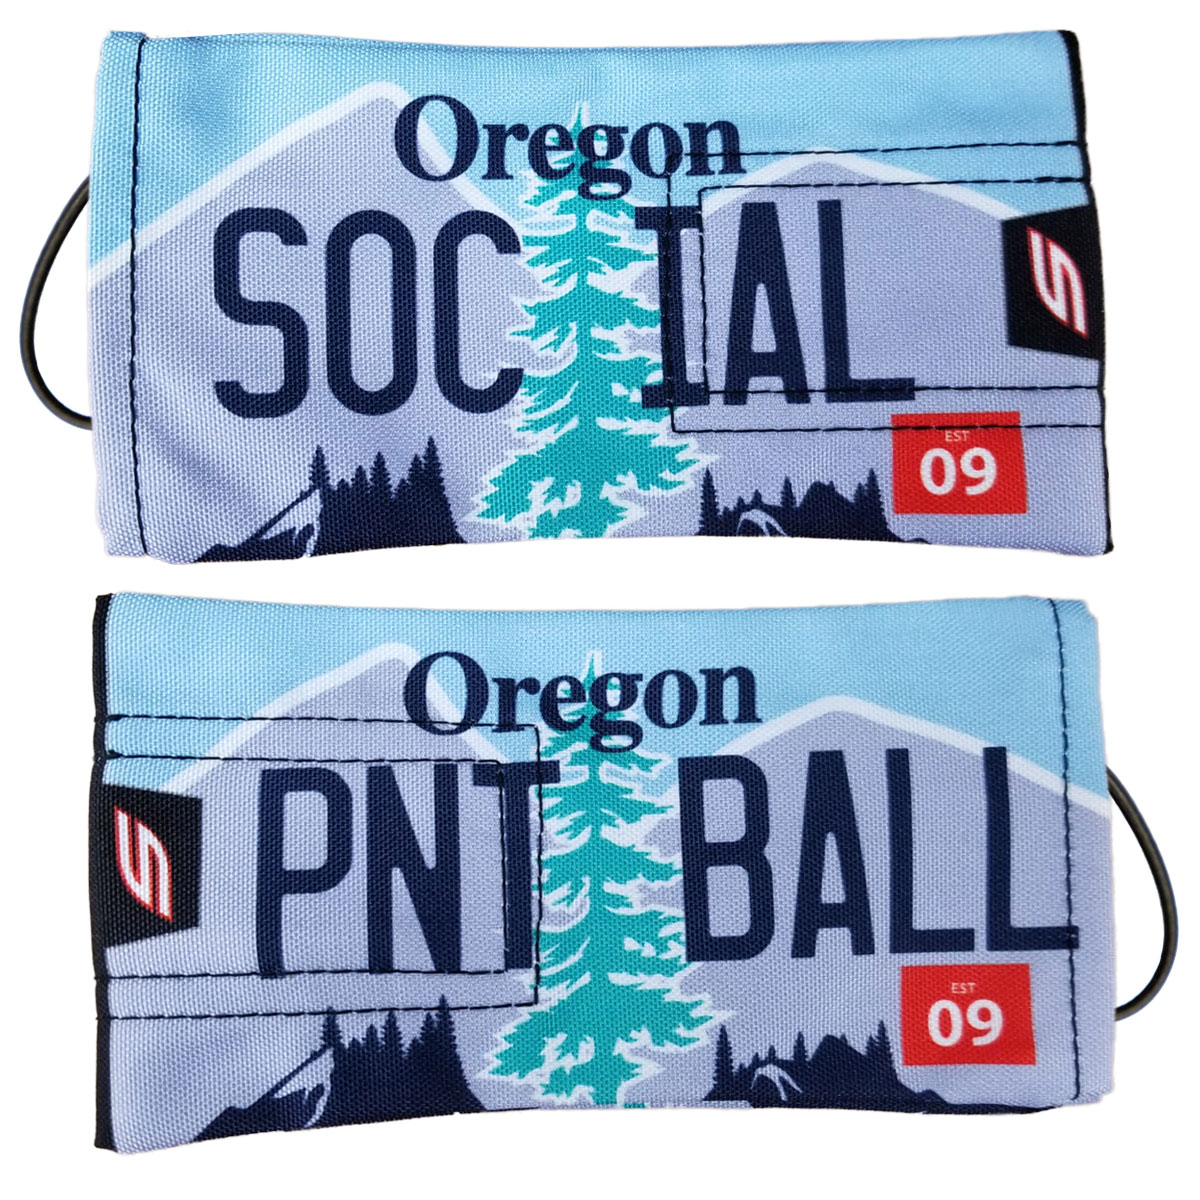 Social Paintball License Plate Barrel Covers 